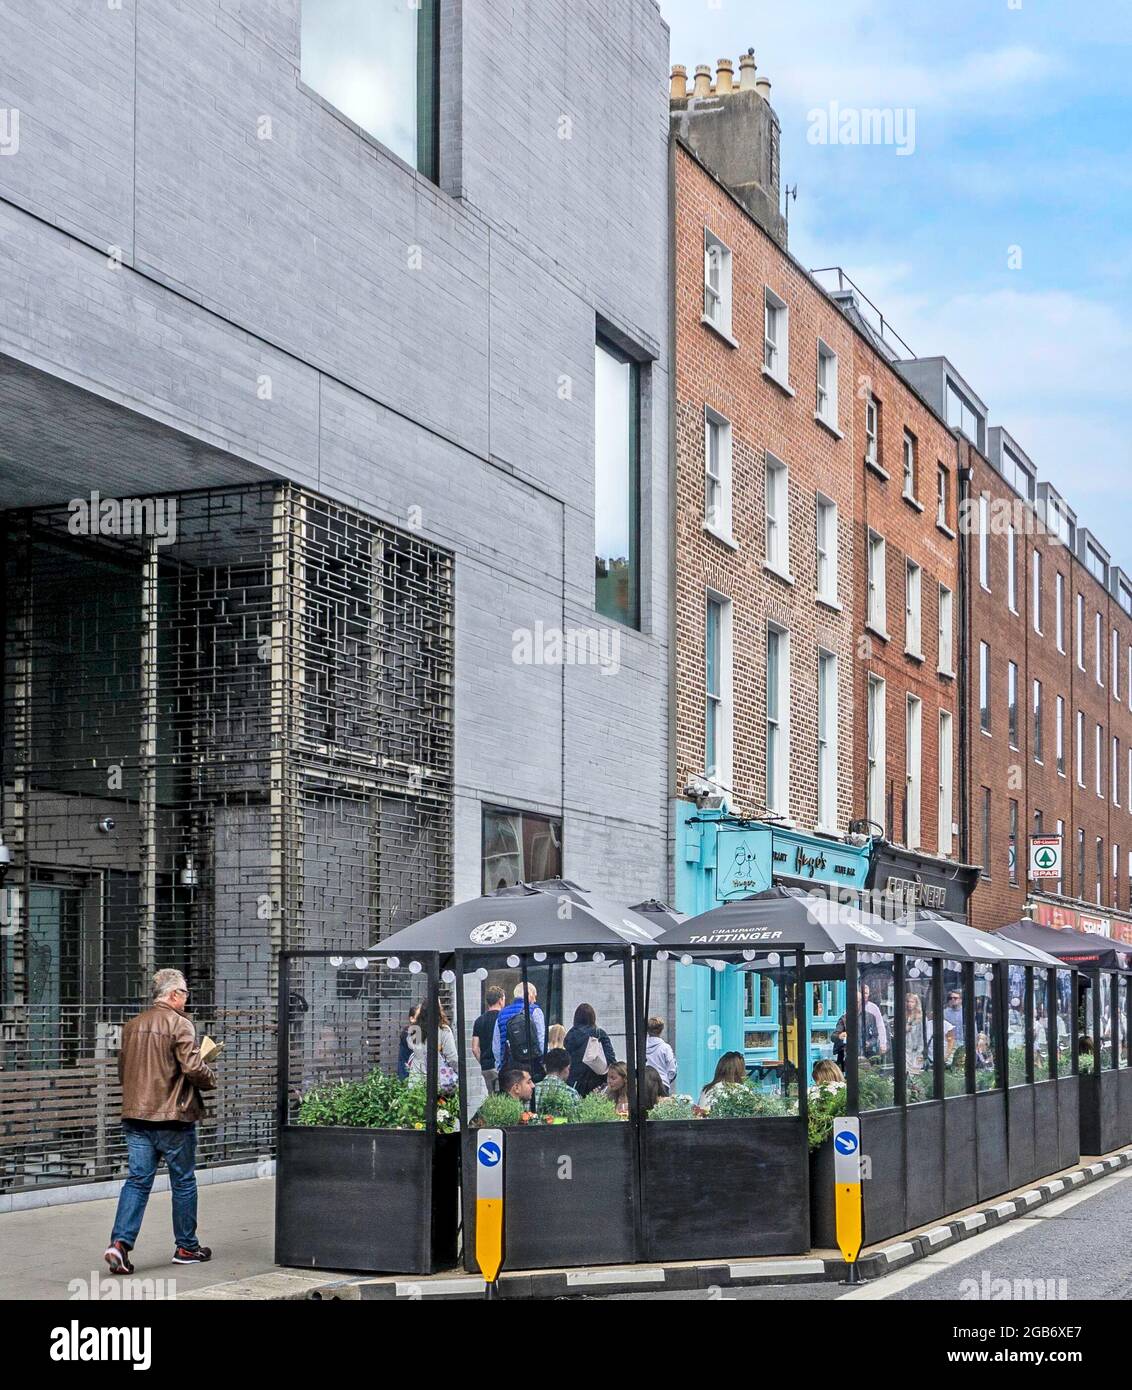 Outdoor dining in Merrion Row in Dublin, Ireland. Parts of the street has been pedestrianised to encourage outdoor dining as  a covid related measure Stock Photo